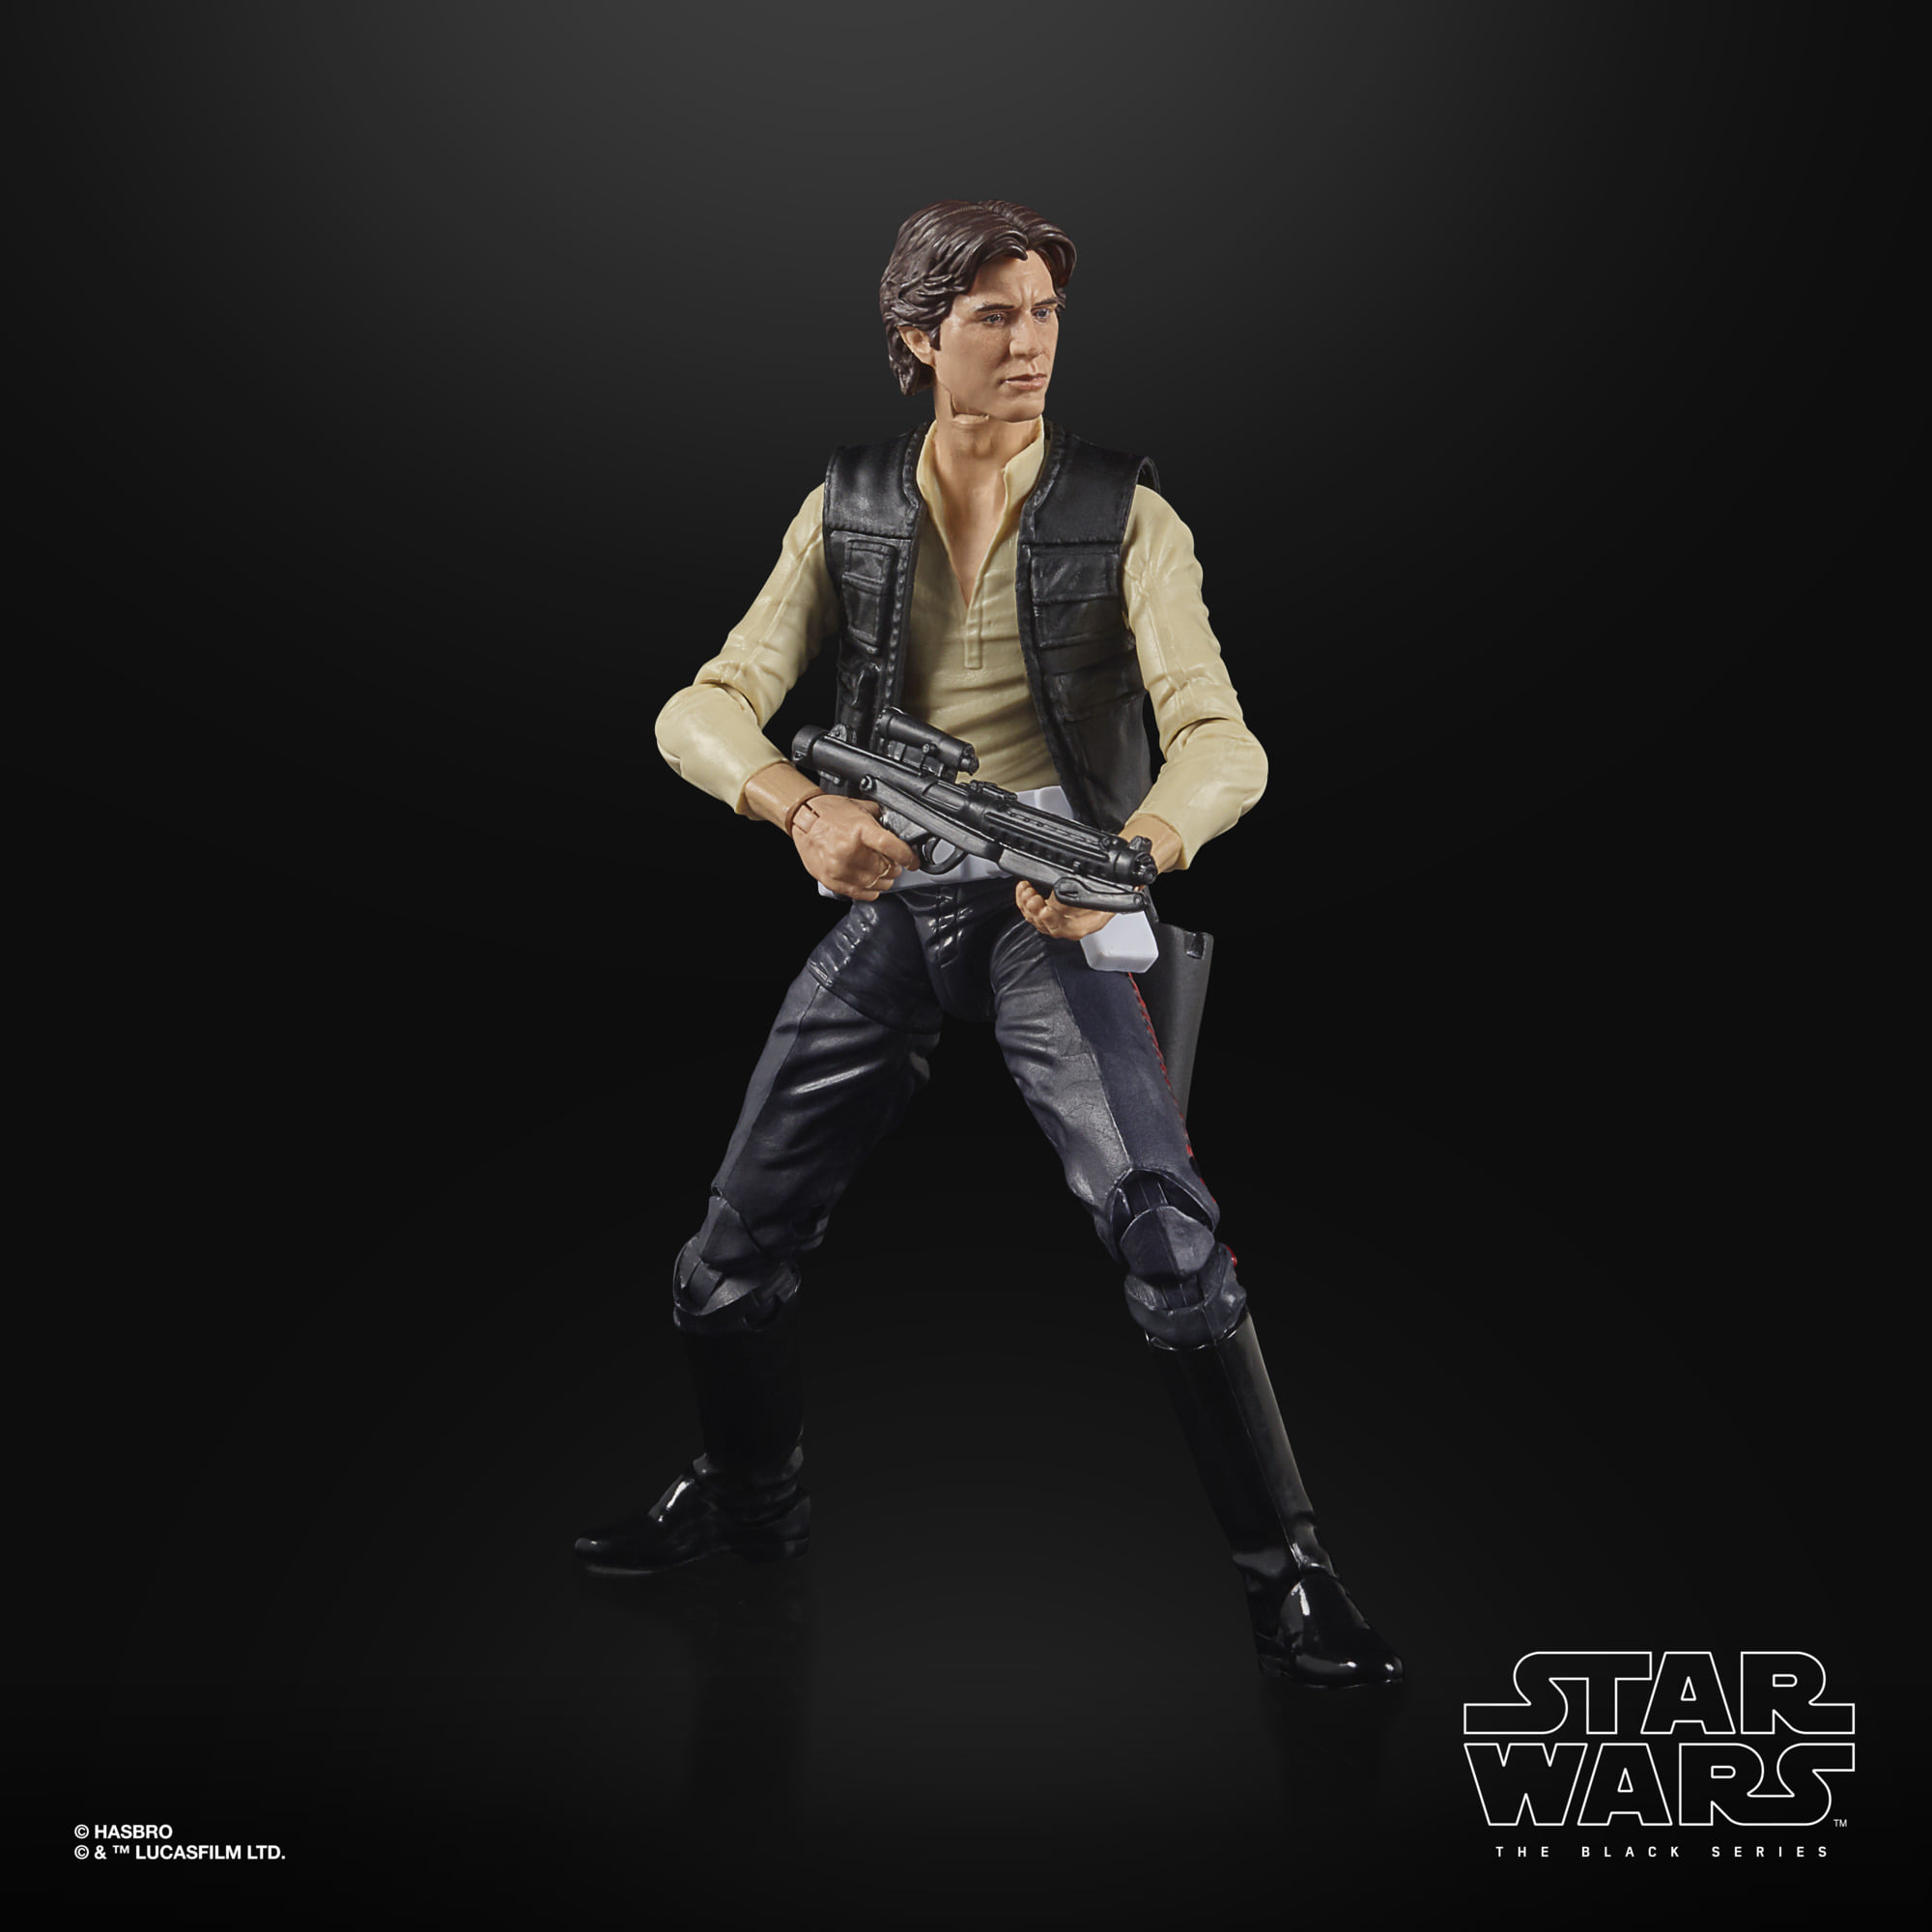 Star Wars The Black Series THE POWER OF THE FORCE - Han Solo F32655L0 5010993899708